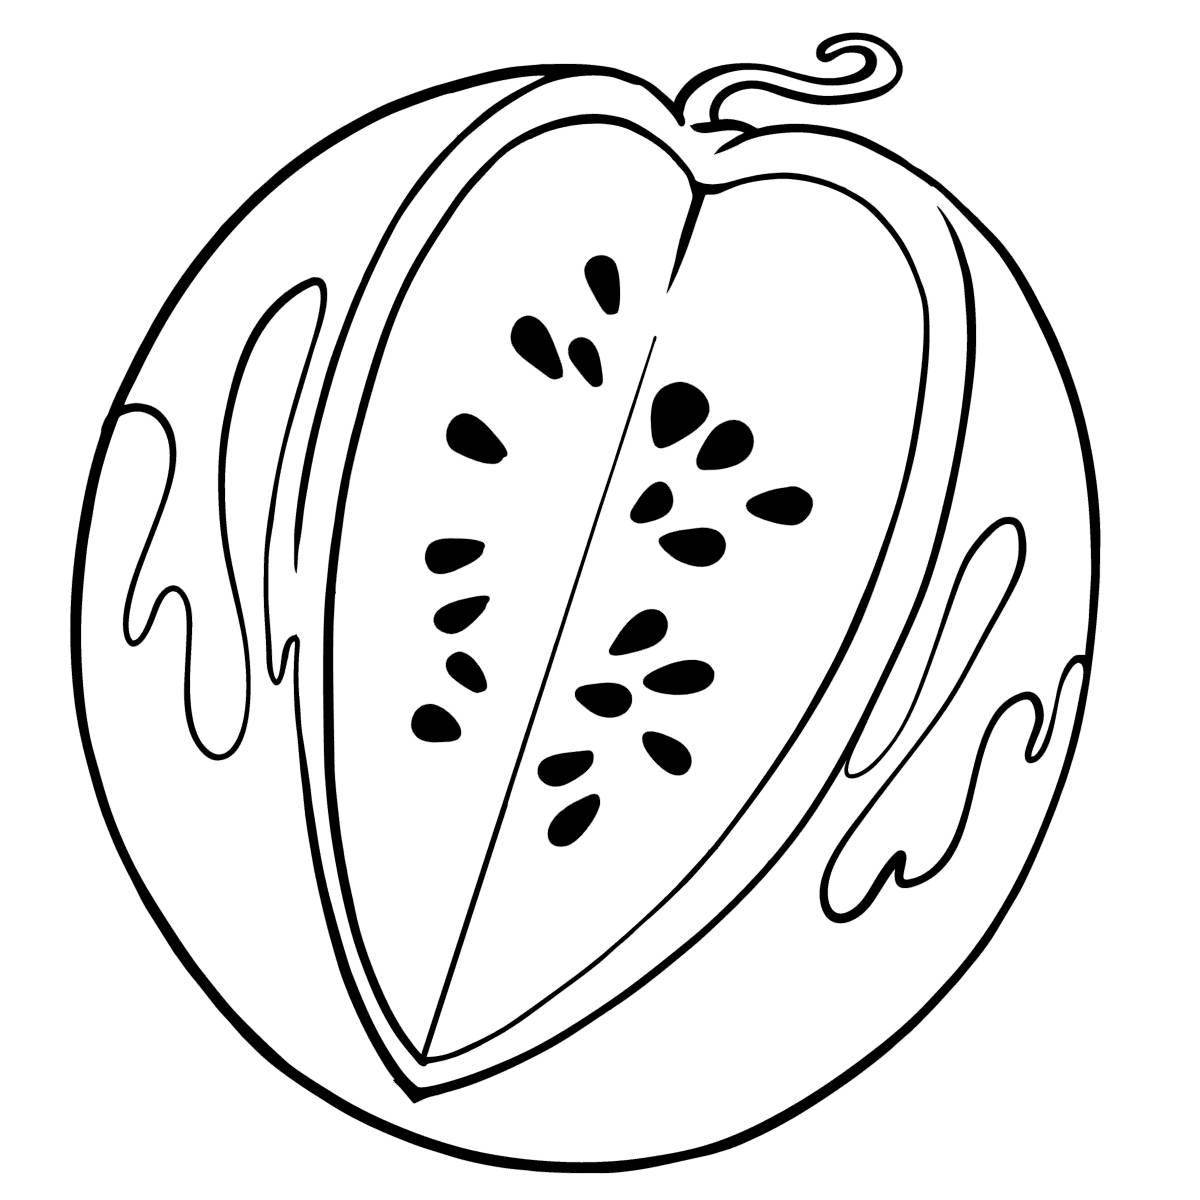 Glorious watermelon coloring pages for kids